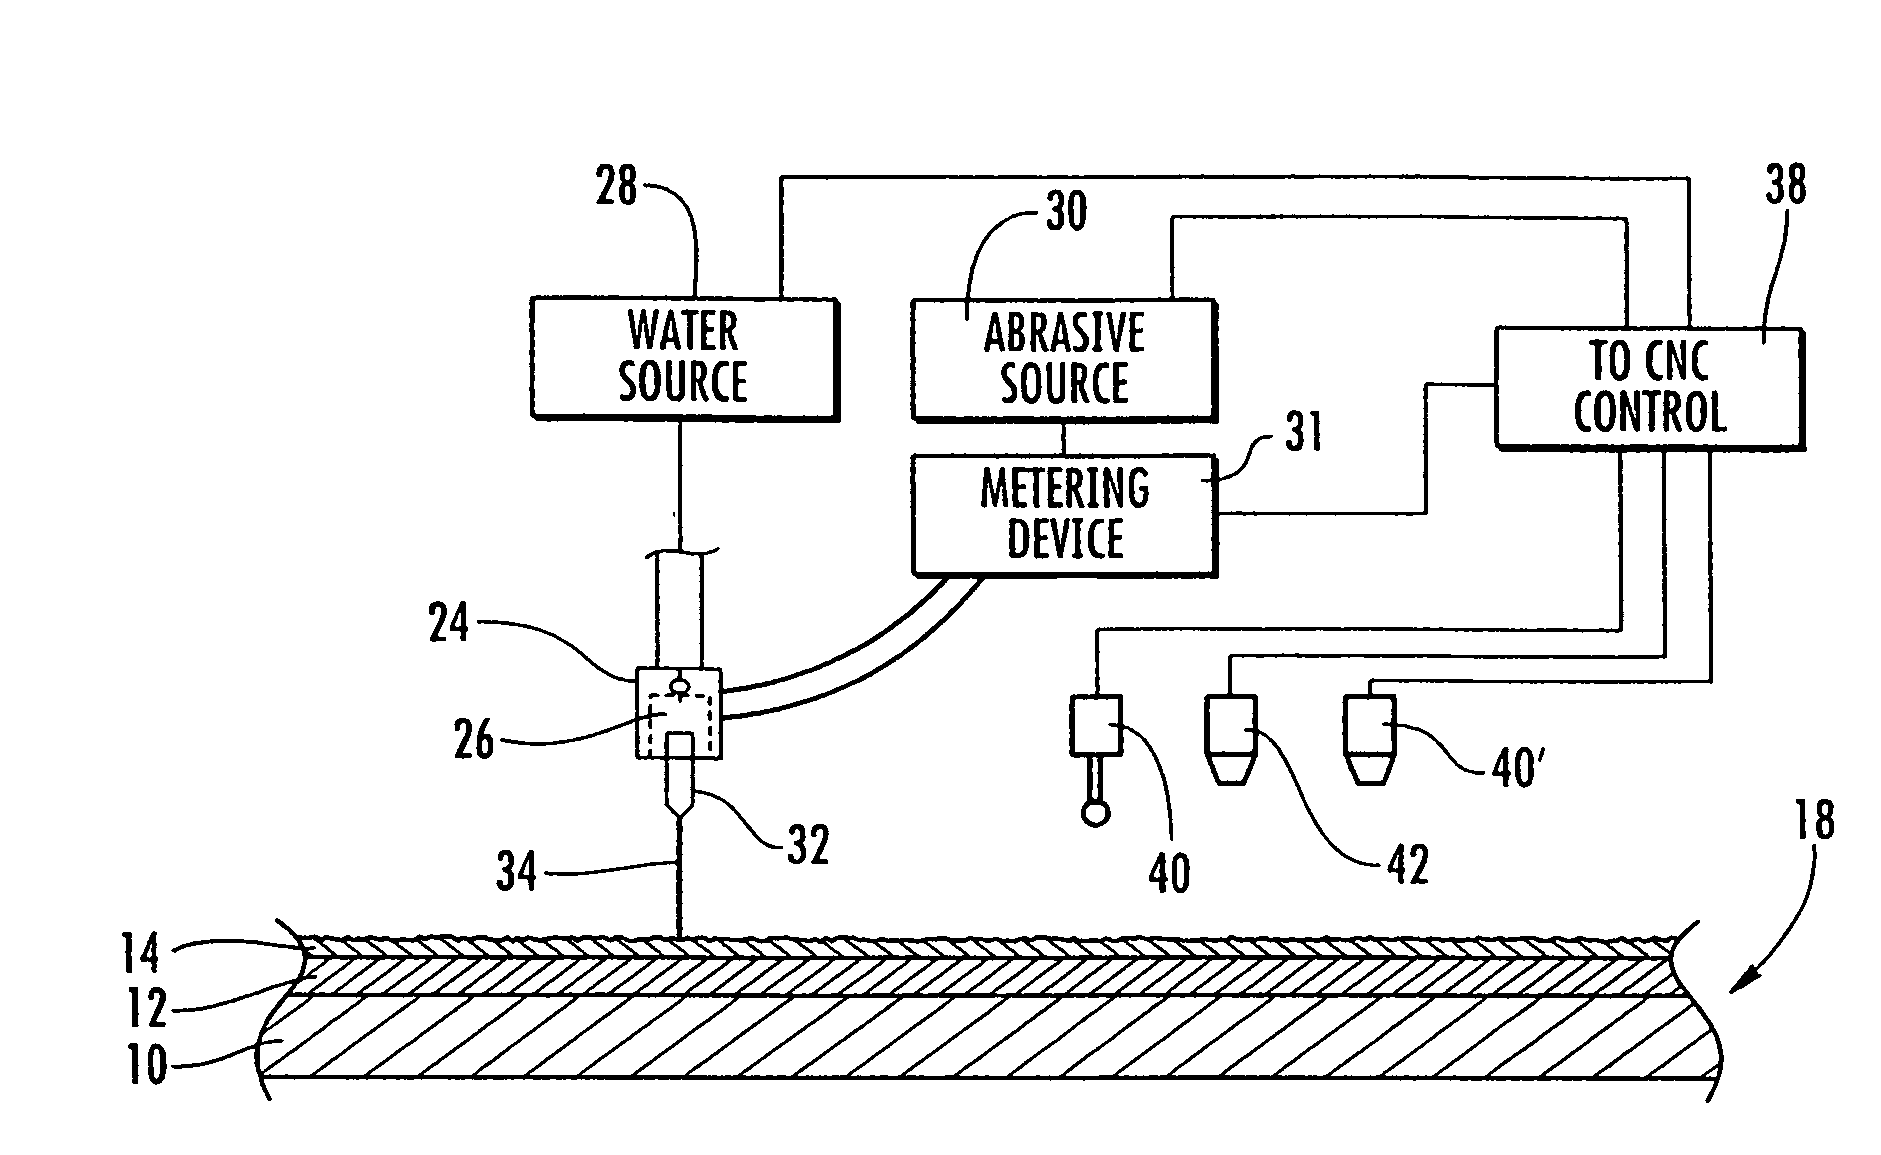 Method and apparatus for removing coatings from a substrate using multiple sequential steps